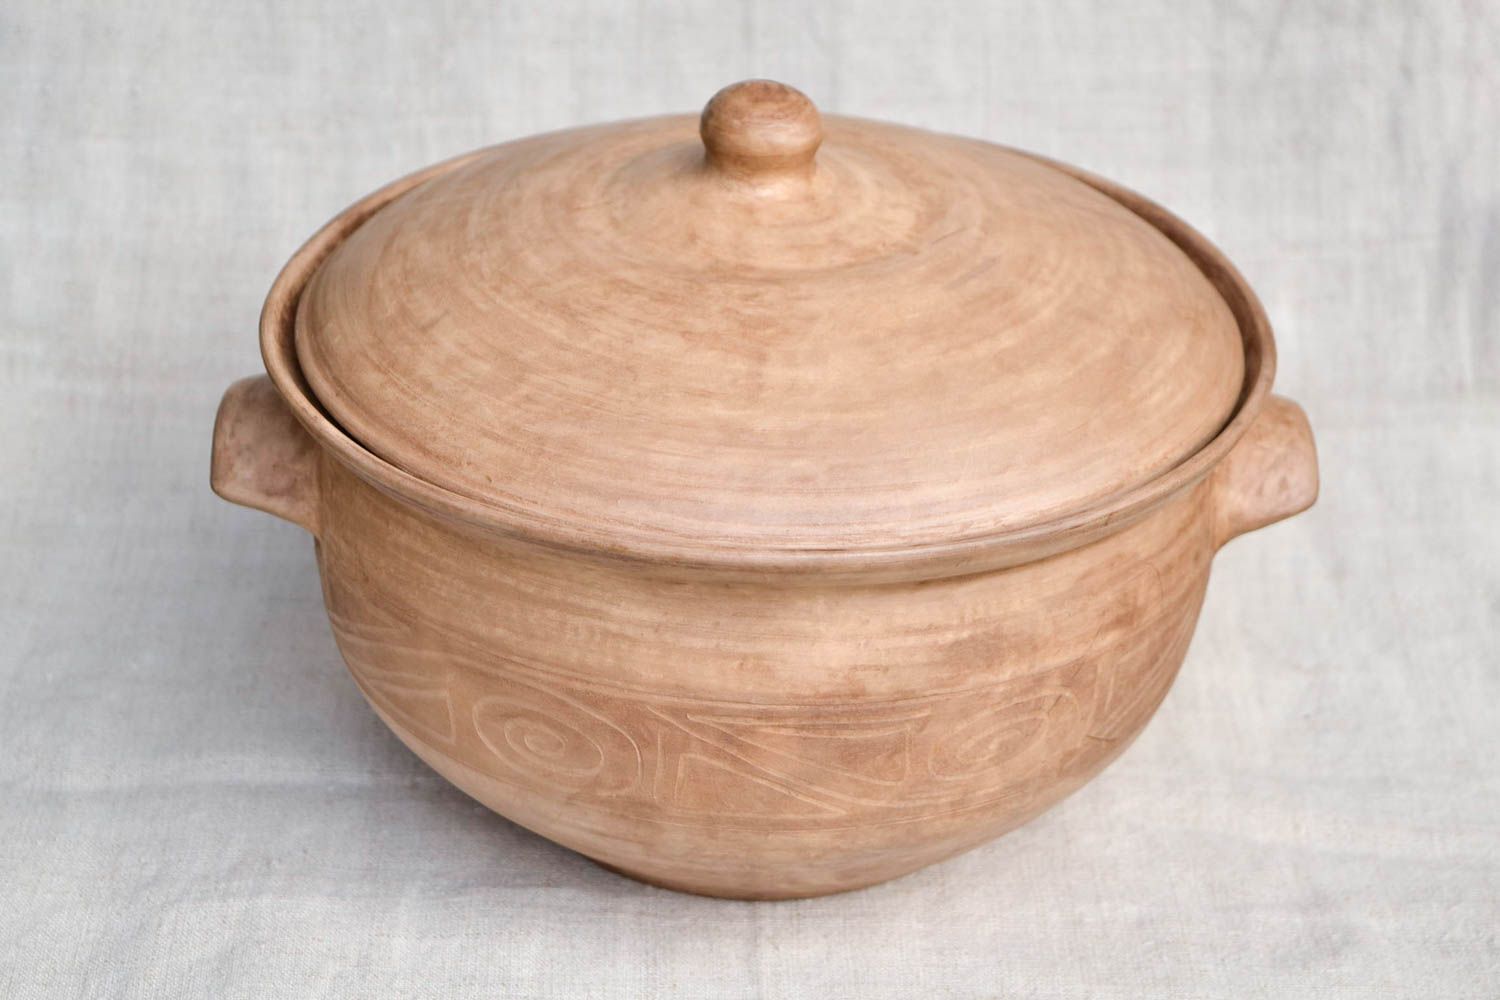 120 oz ceramic Korean style stew pot for cooking with handles and lid 5 lb photo 5